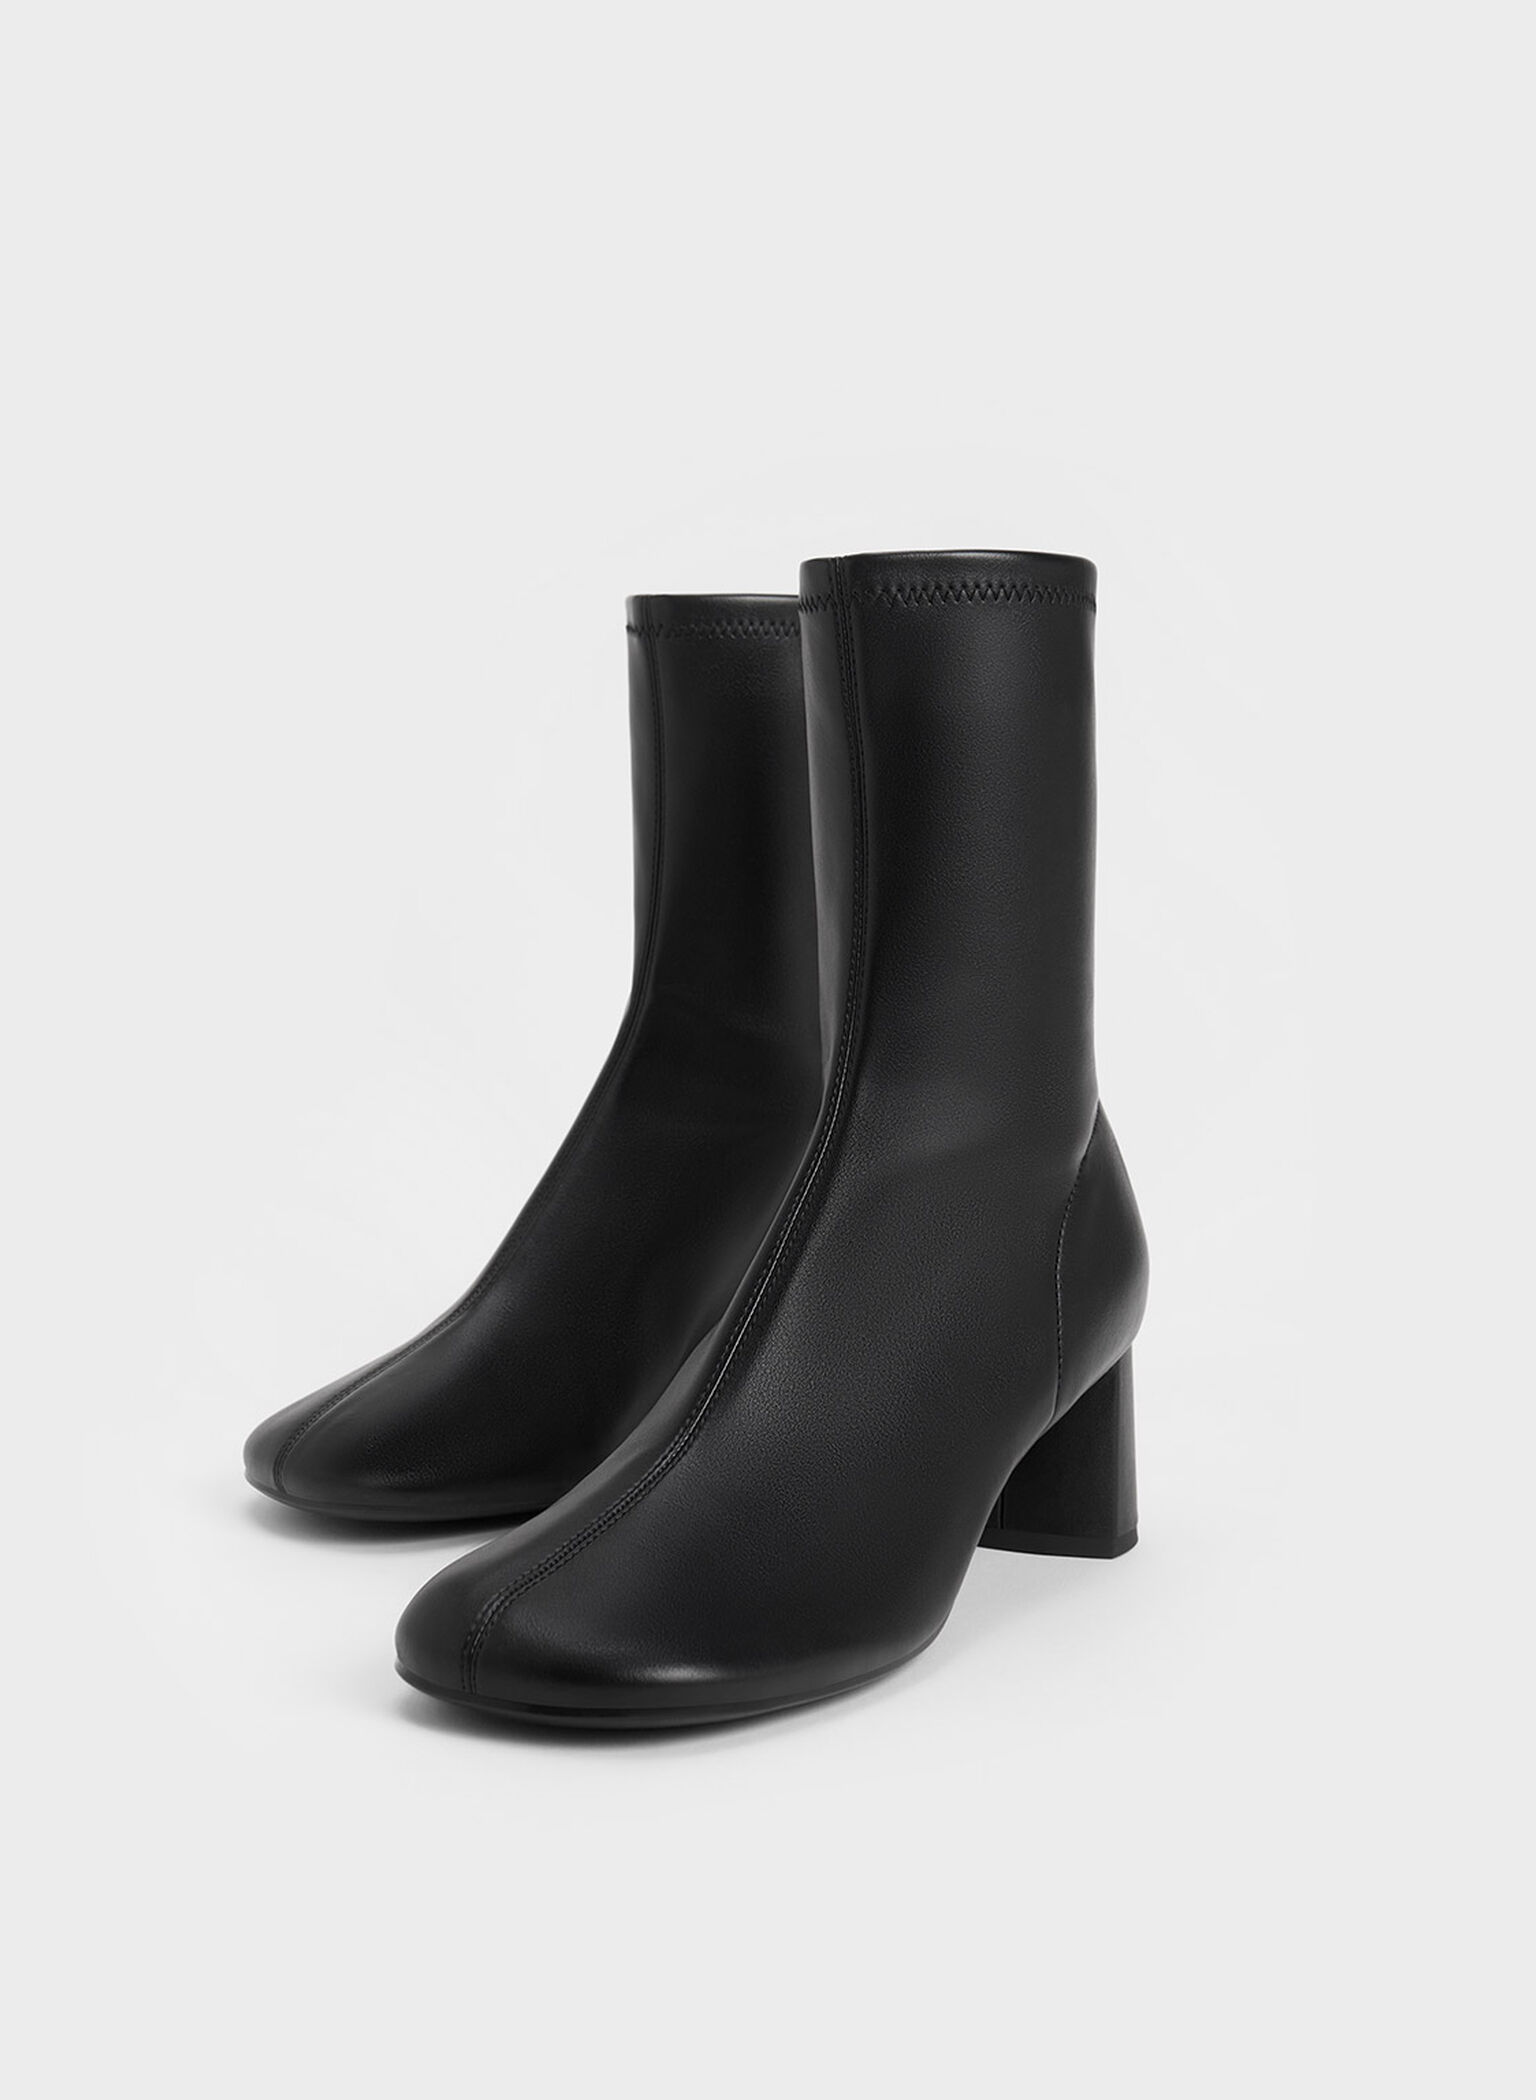 Black Round-Toe Zip-Up Ankle Boots - CHARLES & KEITH US